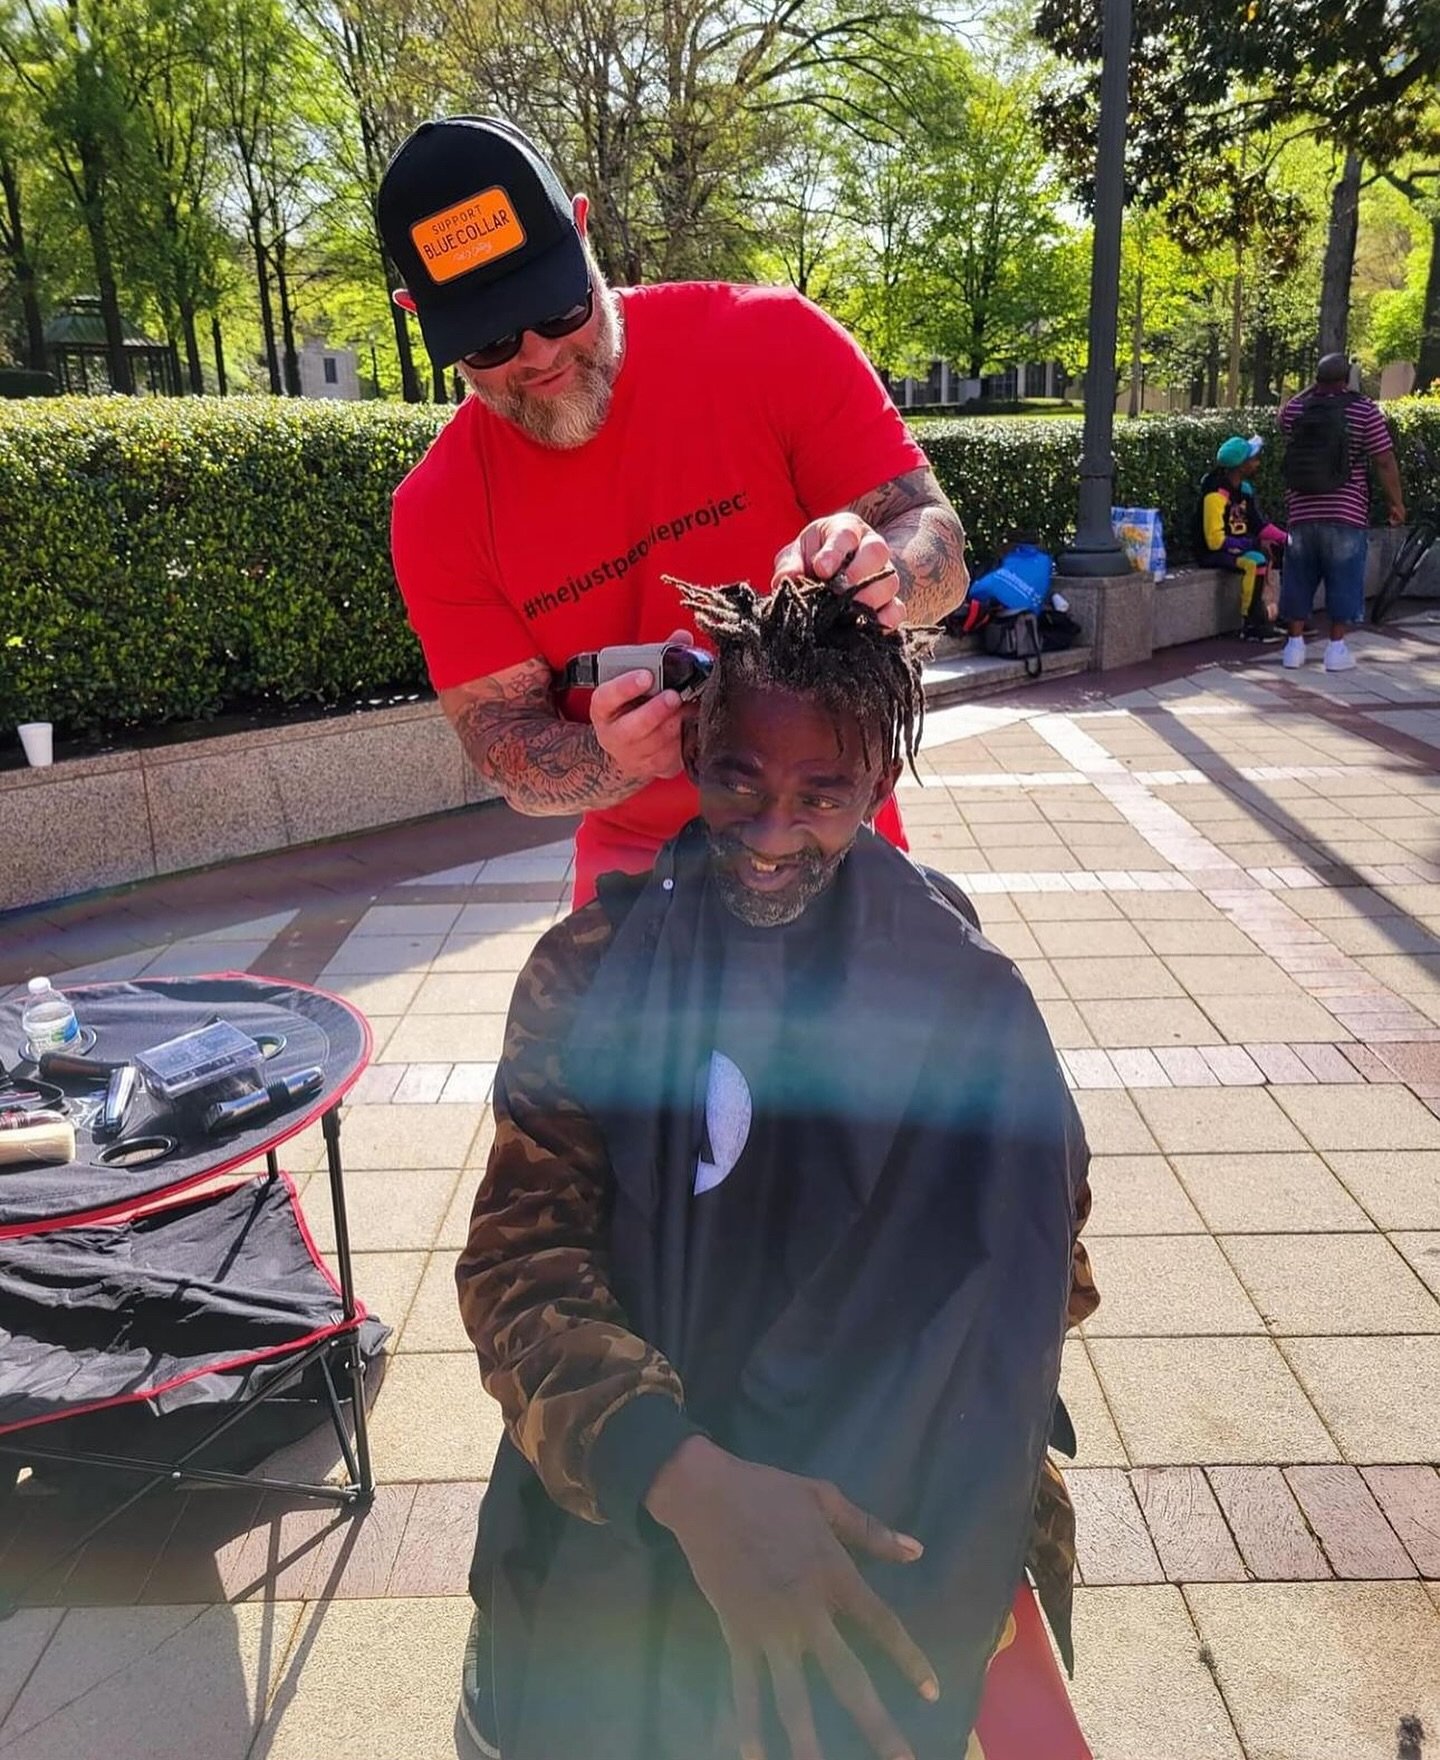 Chris (@thehomelessinbirmingham), founder of The Just People Project, spreading smiles and giving haircuts to the homeless at an outdoor park event. @thejustpeopleproject is a nonprofit organization focused on serving the homeless in Birmingham with 